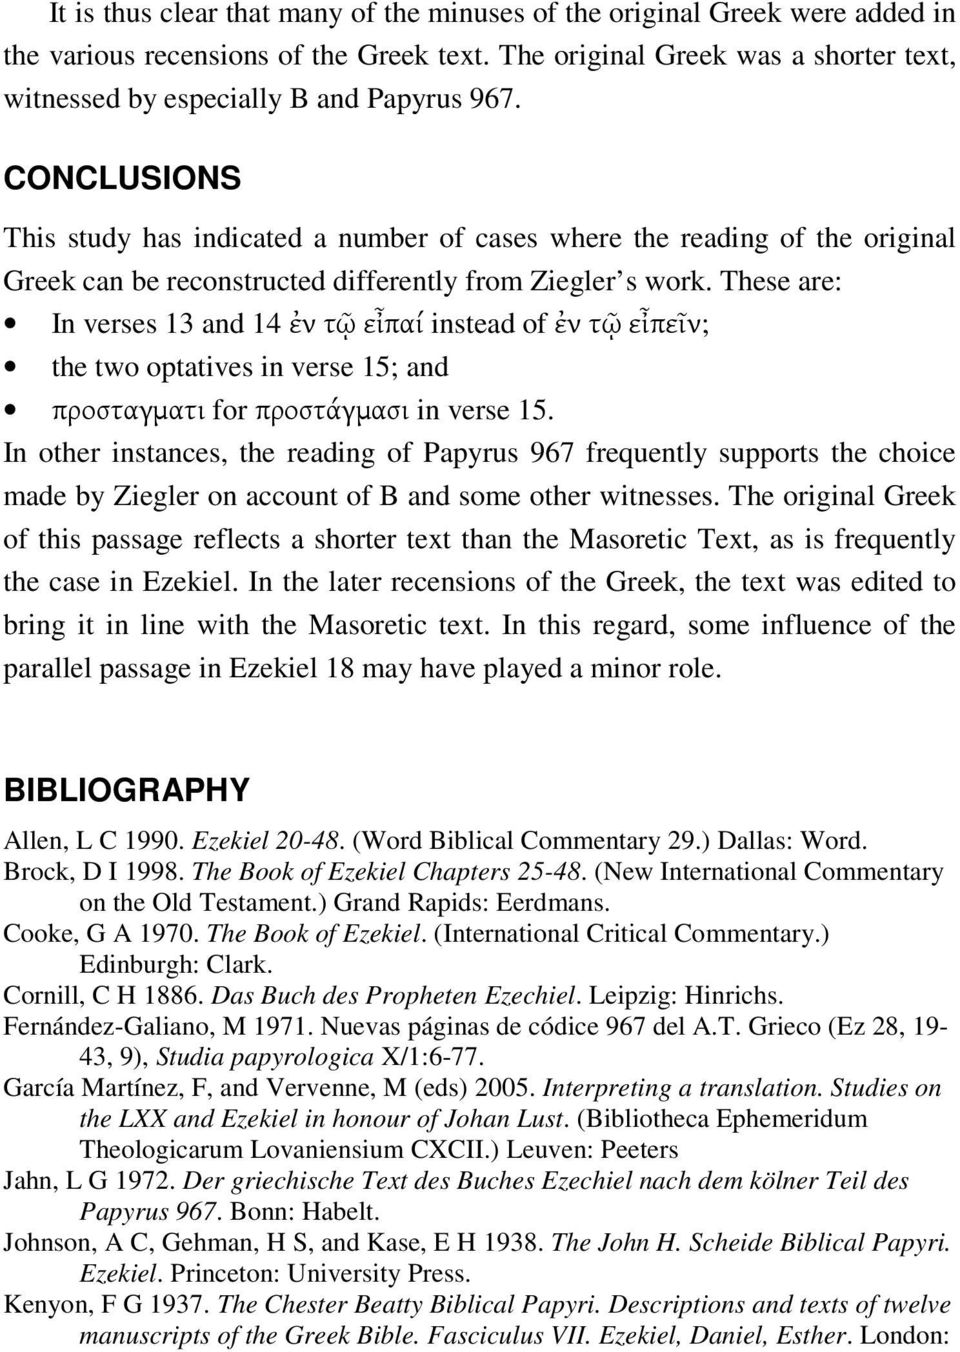 CONCLUSIONS This study has indicated a number of cases where the reading of the original Greek can be reconstructed differently from Ziegler s work.